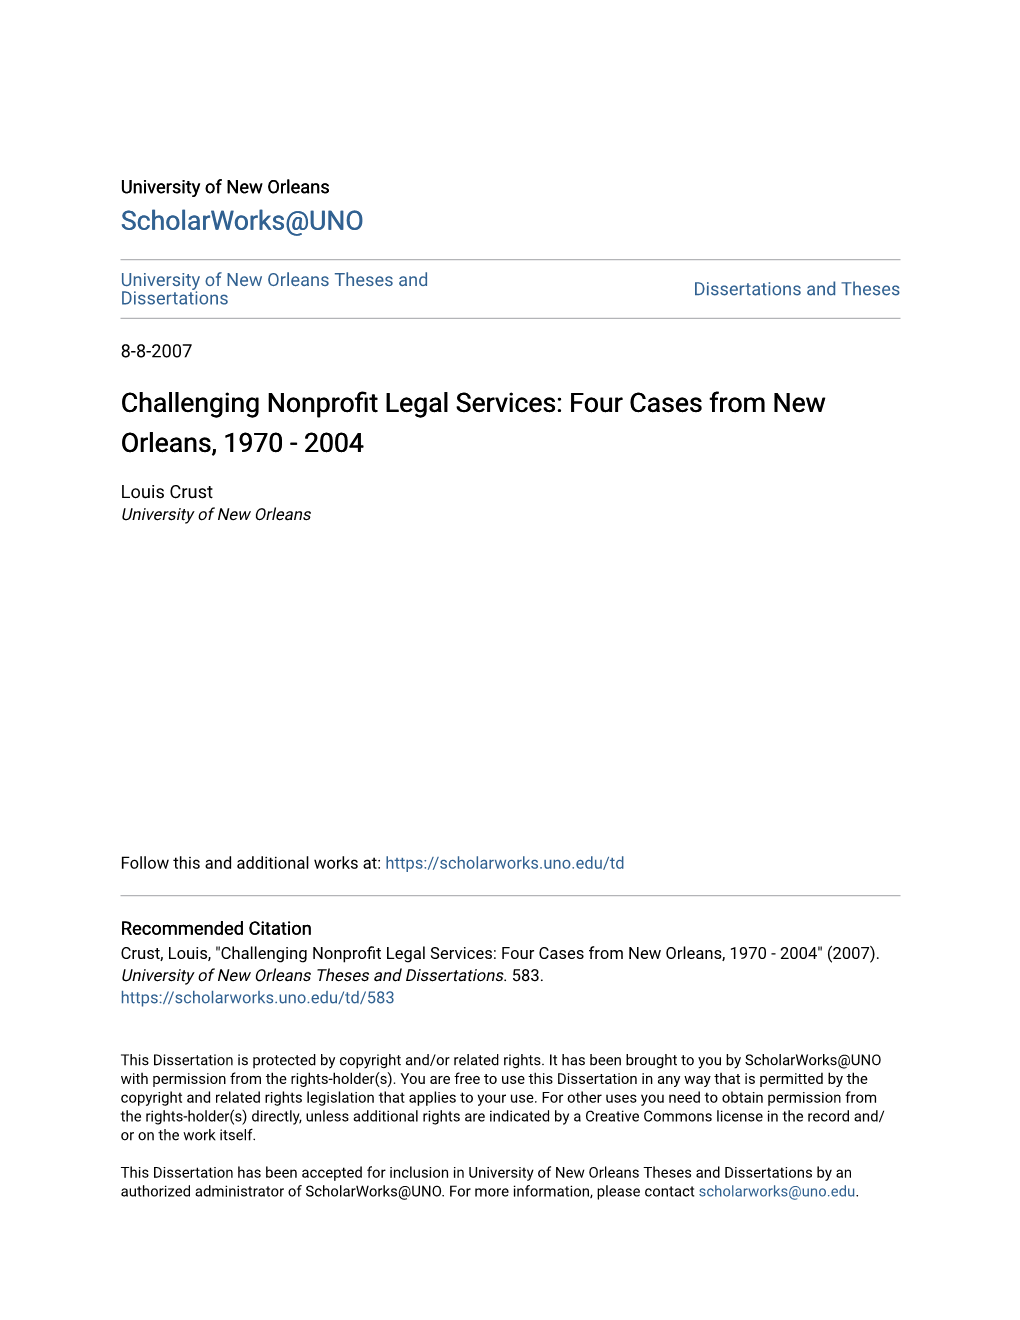 Challenging Nonprofit Legal Services: Four Cases from New Orleans, 1970 - 2004